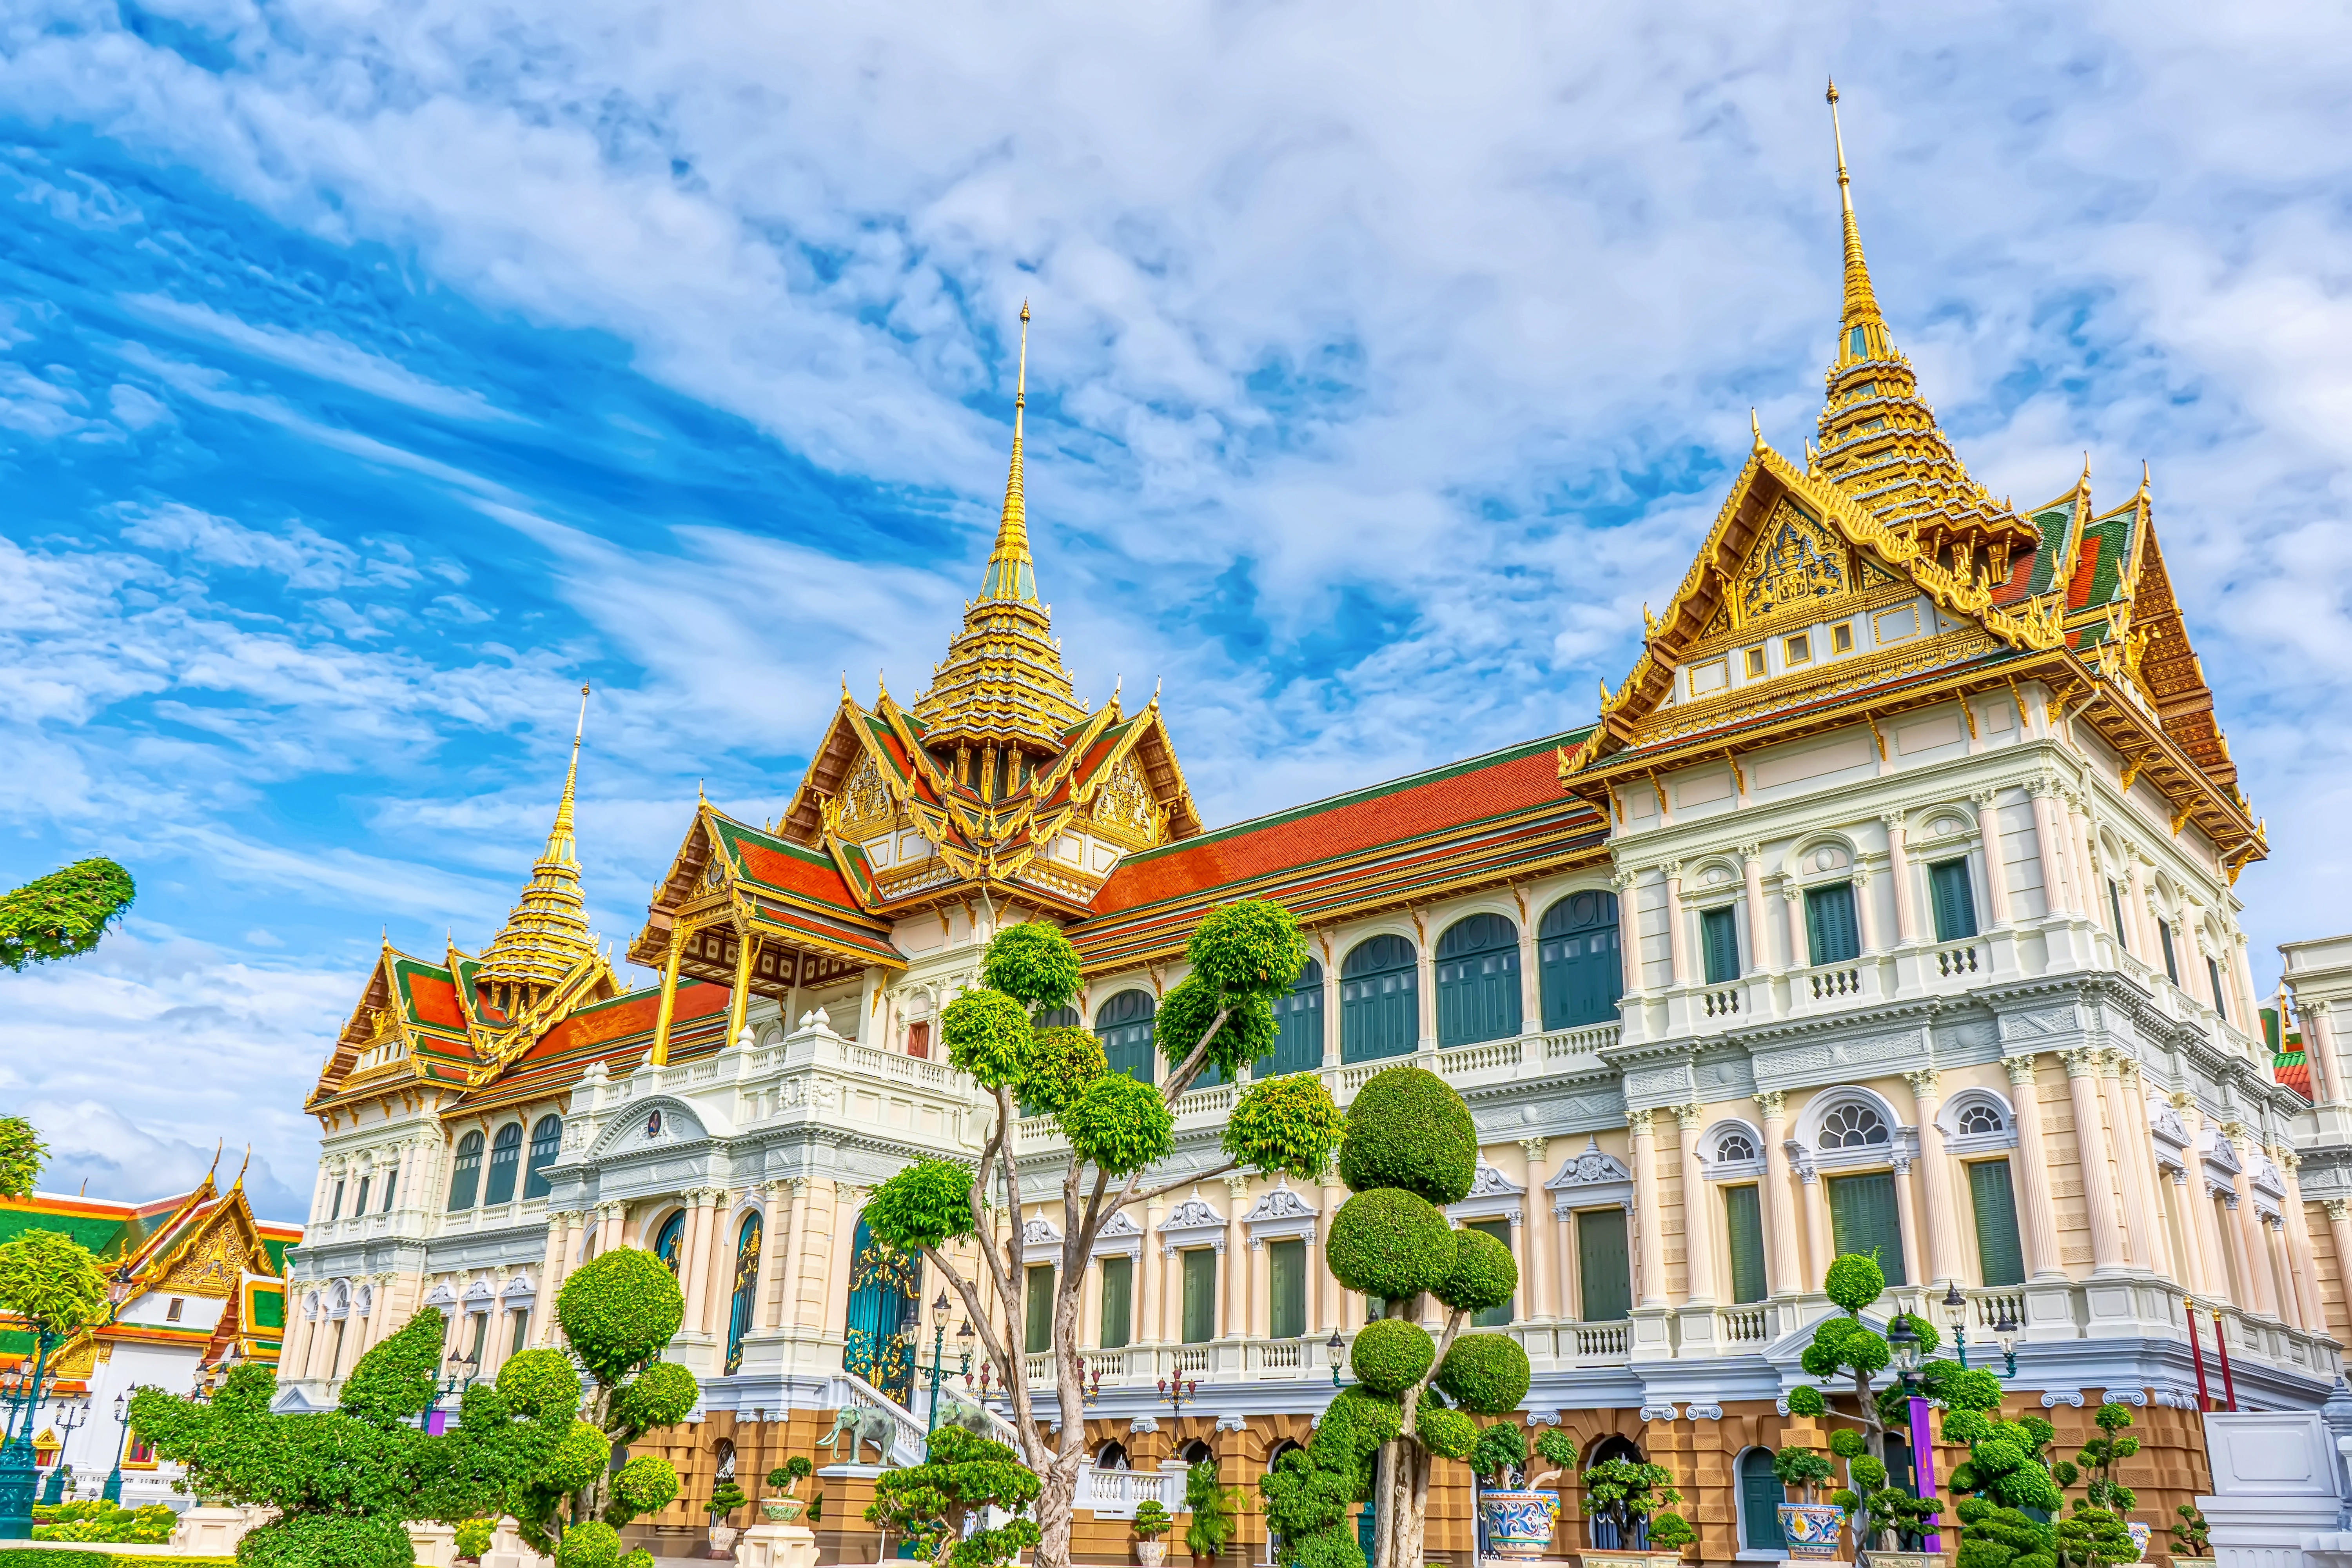 ﻿The Grand Palace